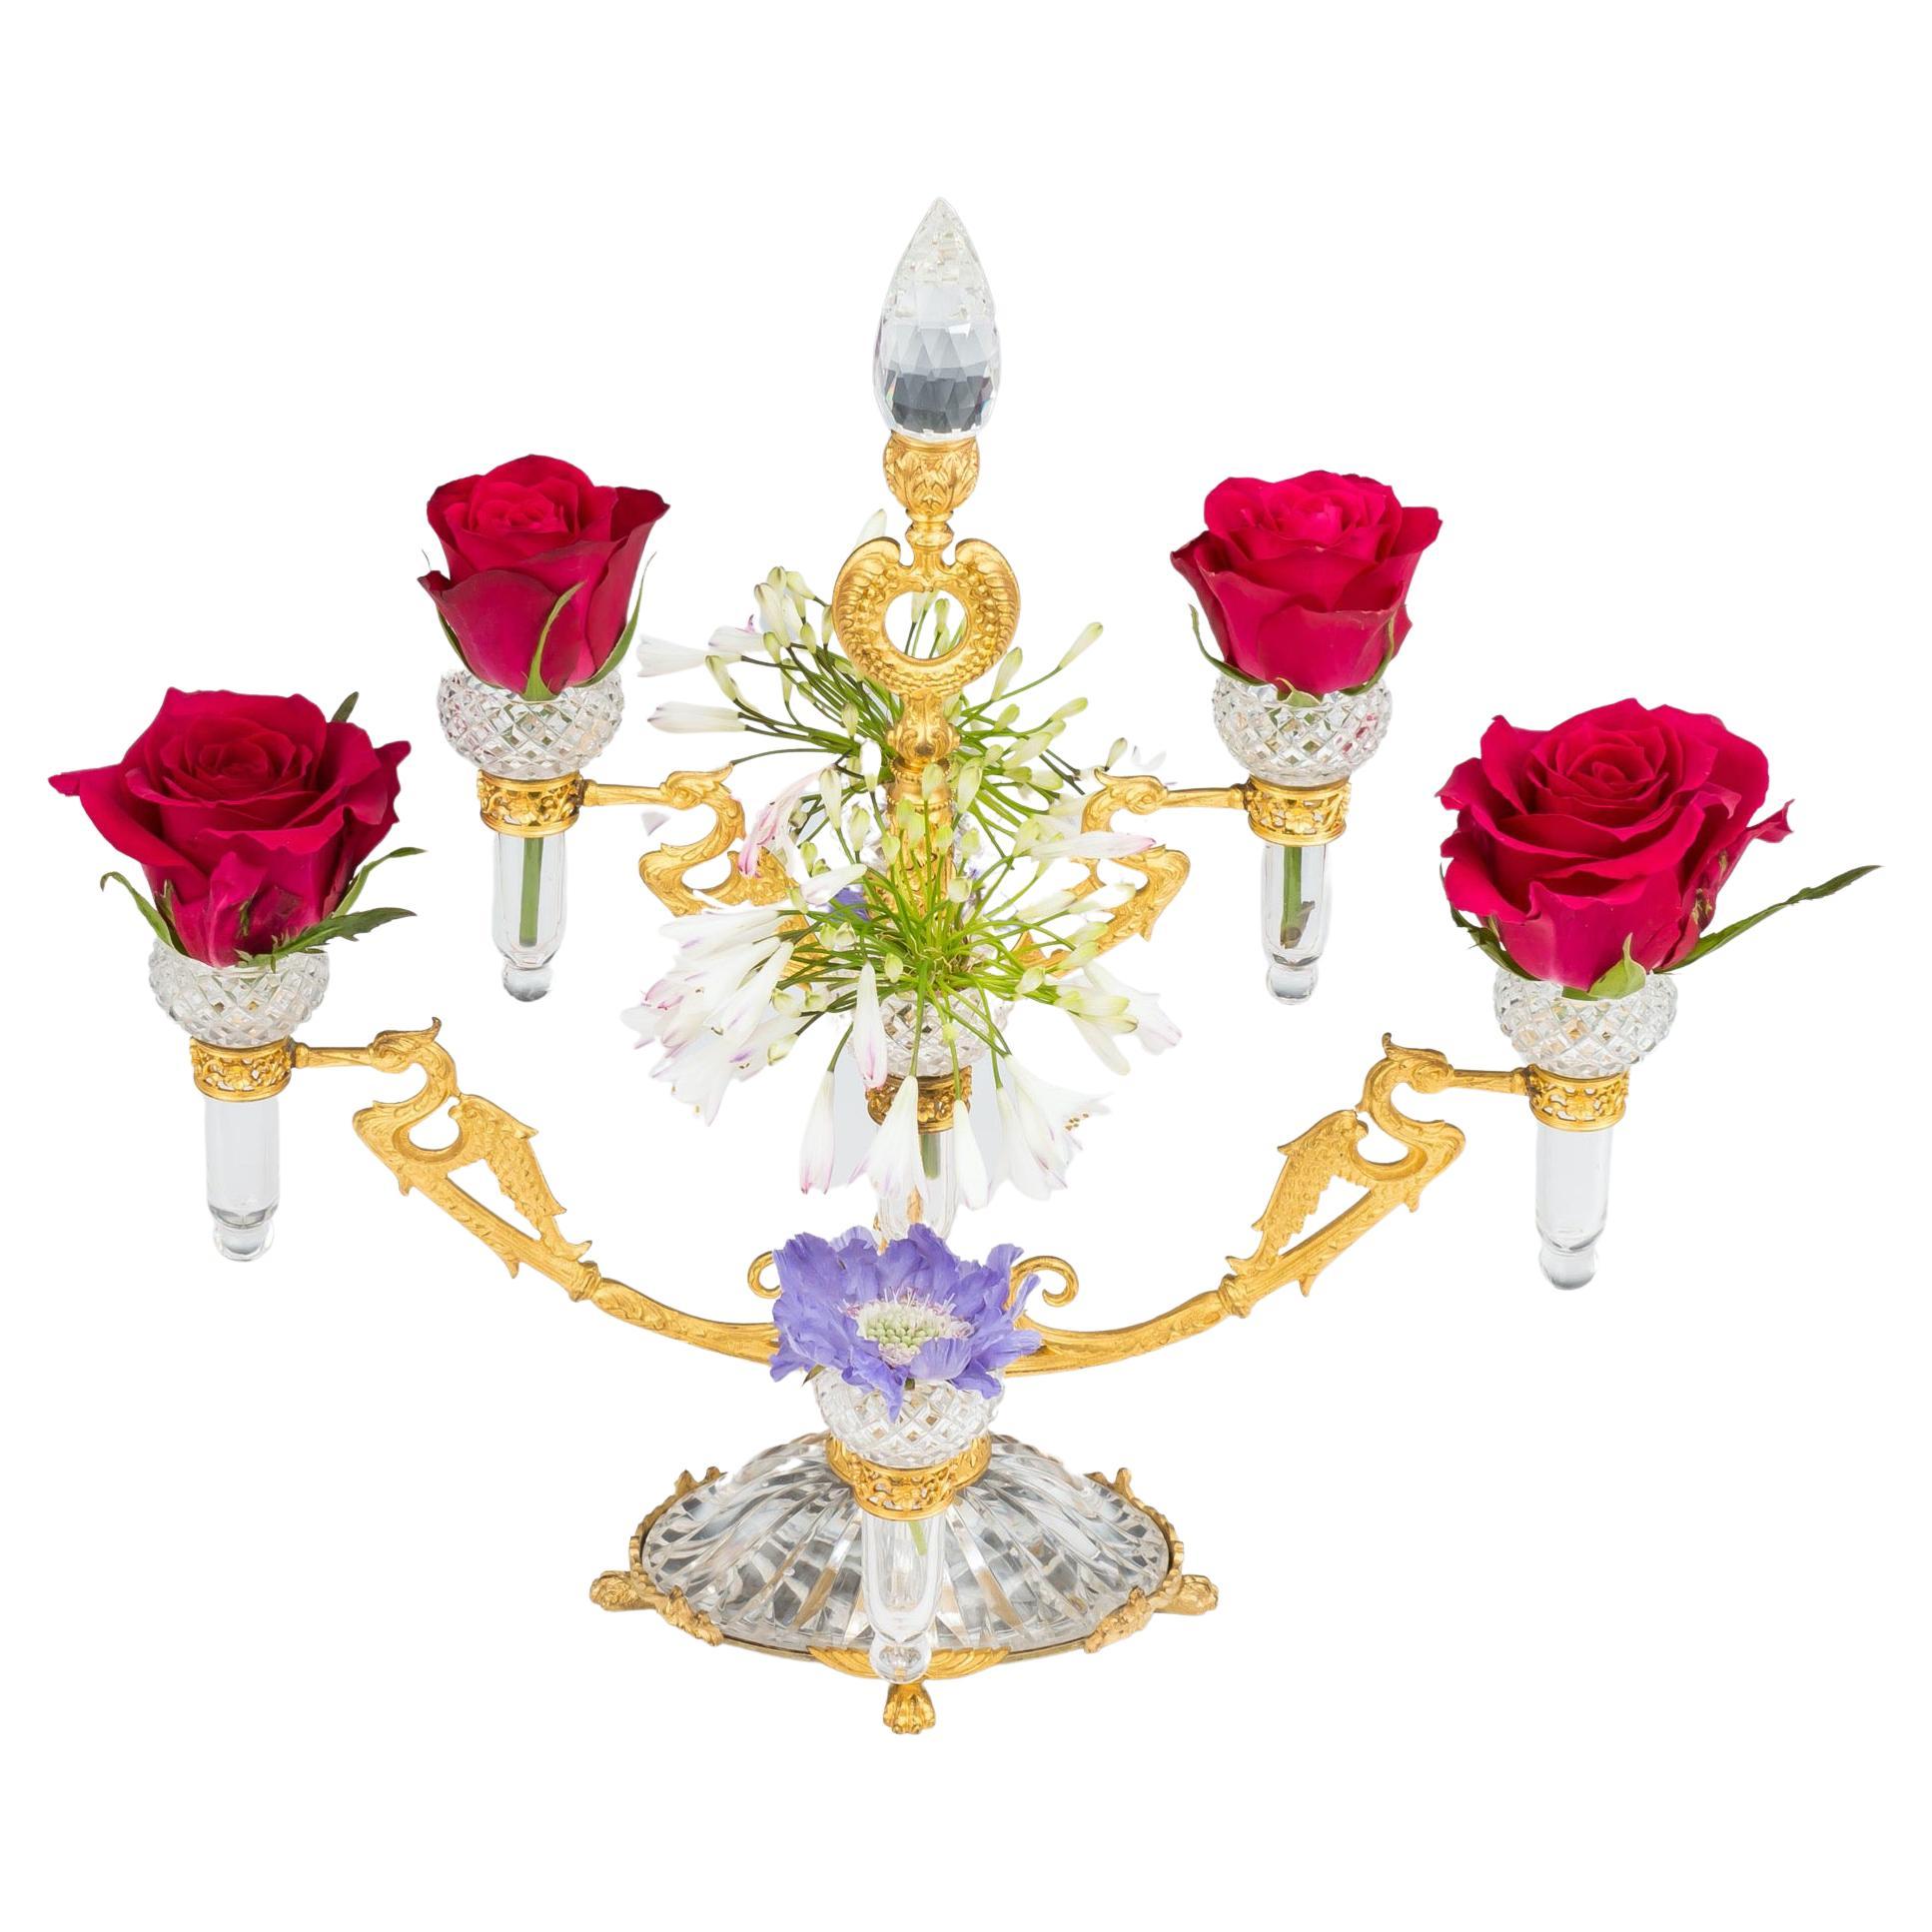 Unusual Ormolu Mounted & Cut Glass Flower Epergne by F&C Osler For Sale